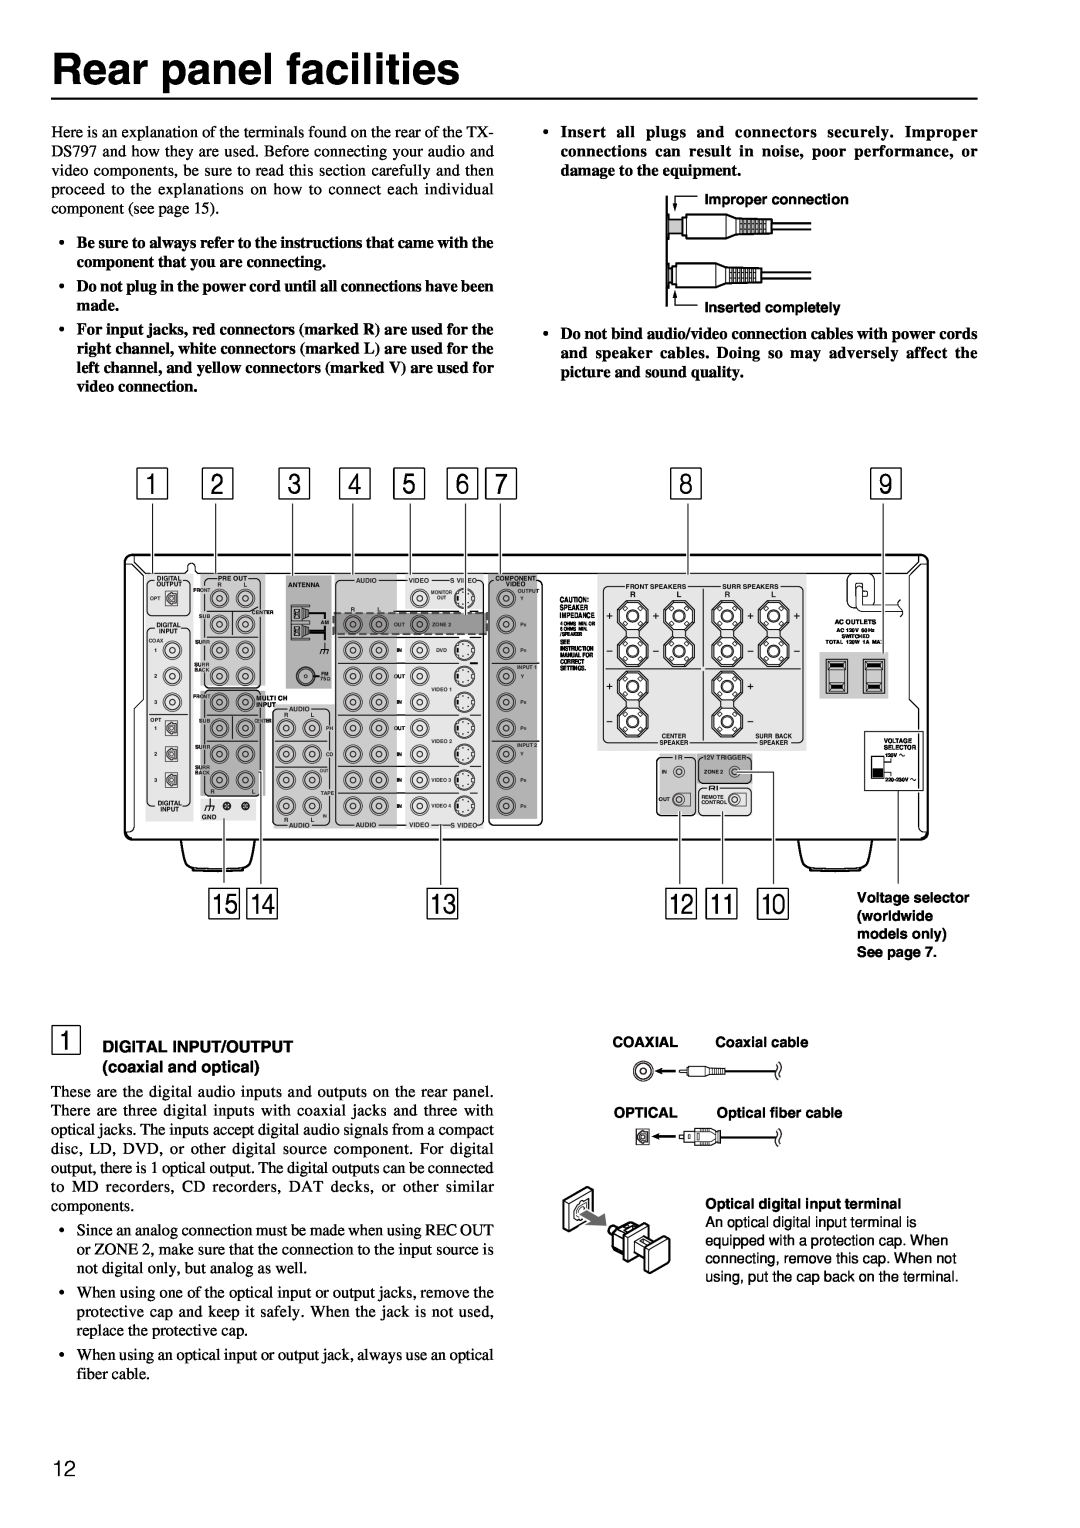 Onkyo TX-DS797 instruction manual Rear panel facilities, DIGITAL INPUT/OUTPUT coaxial and optical 